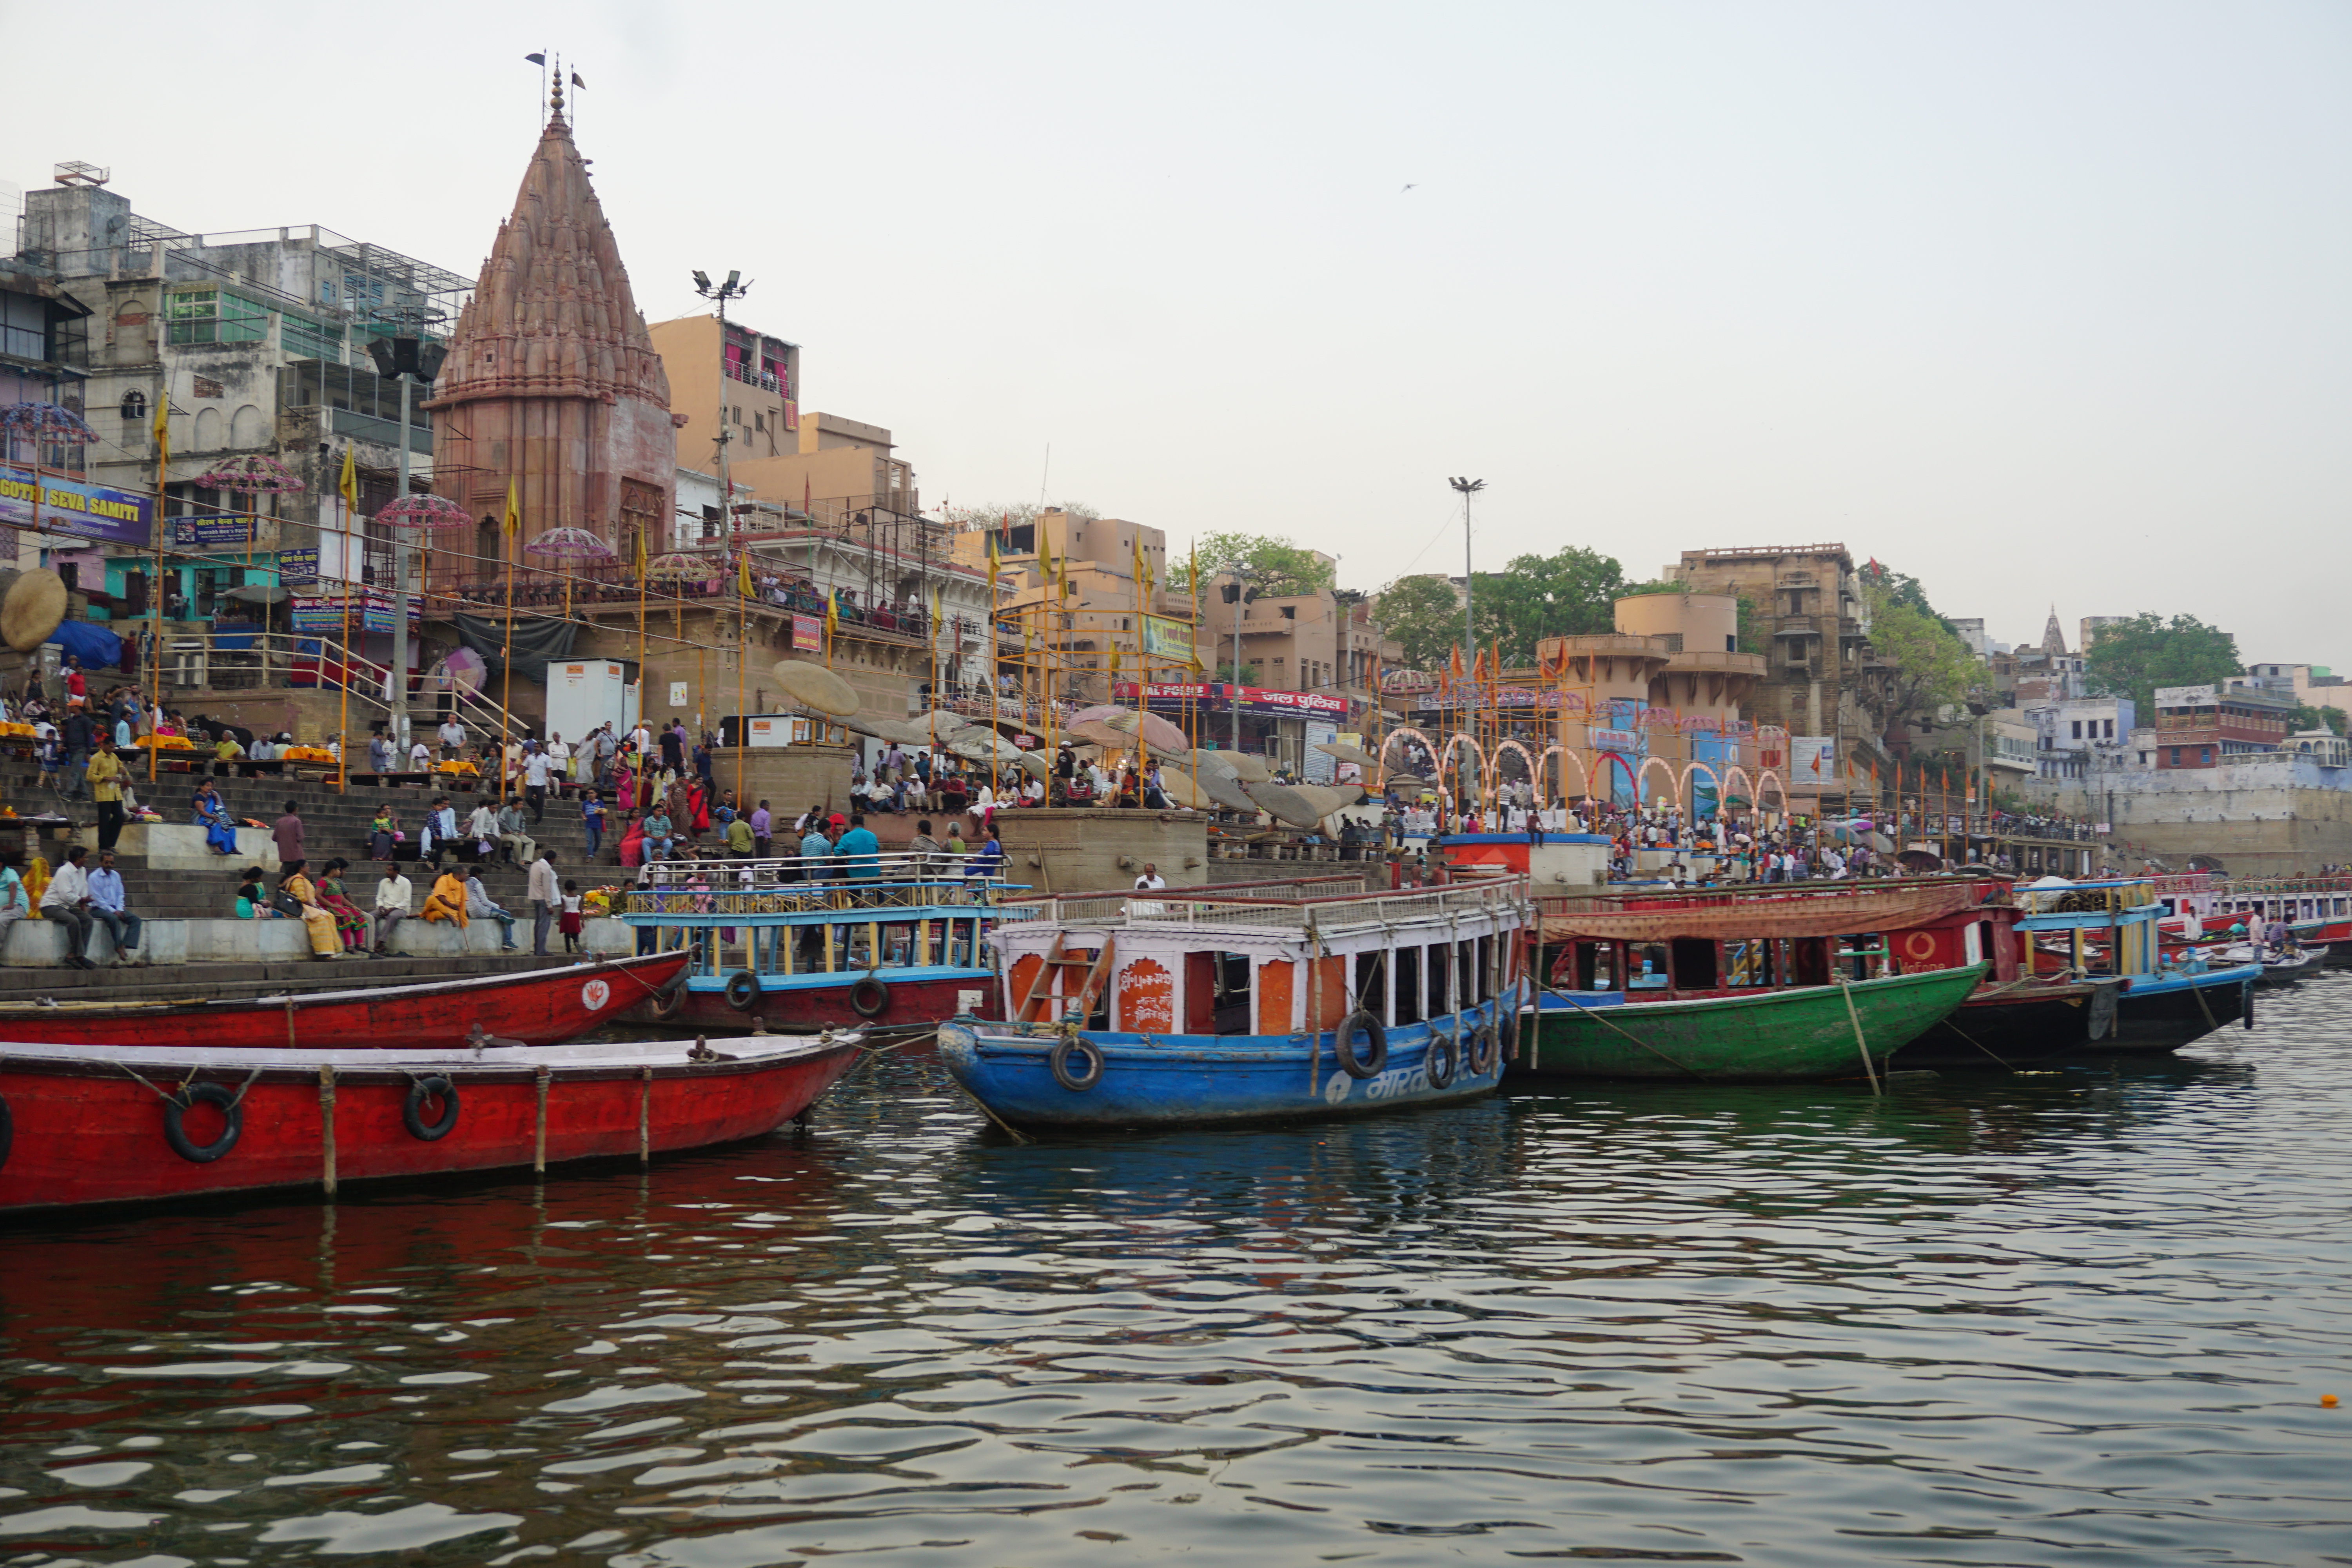 Vegan Travel - An Exploration on the Ganges River in the Hindu "Holy City" of Varanasi, India